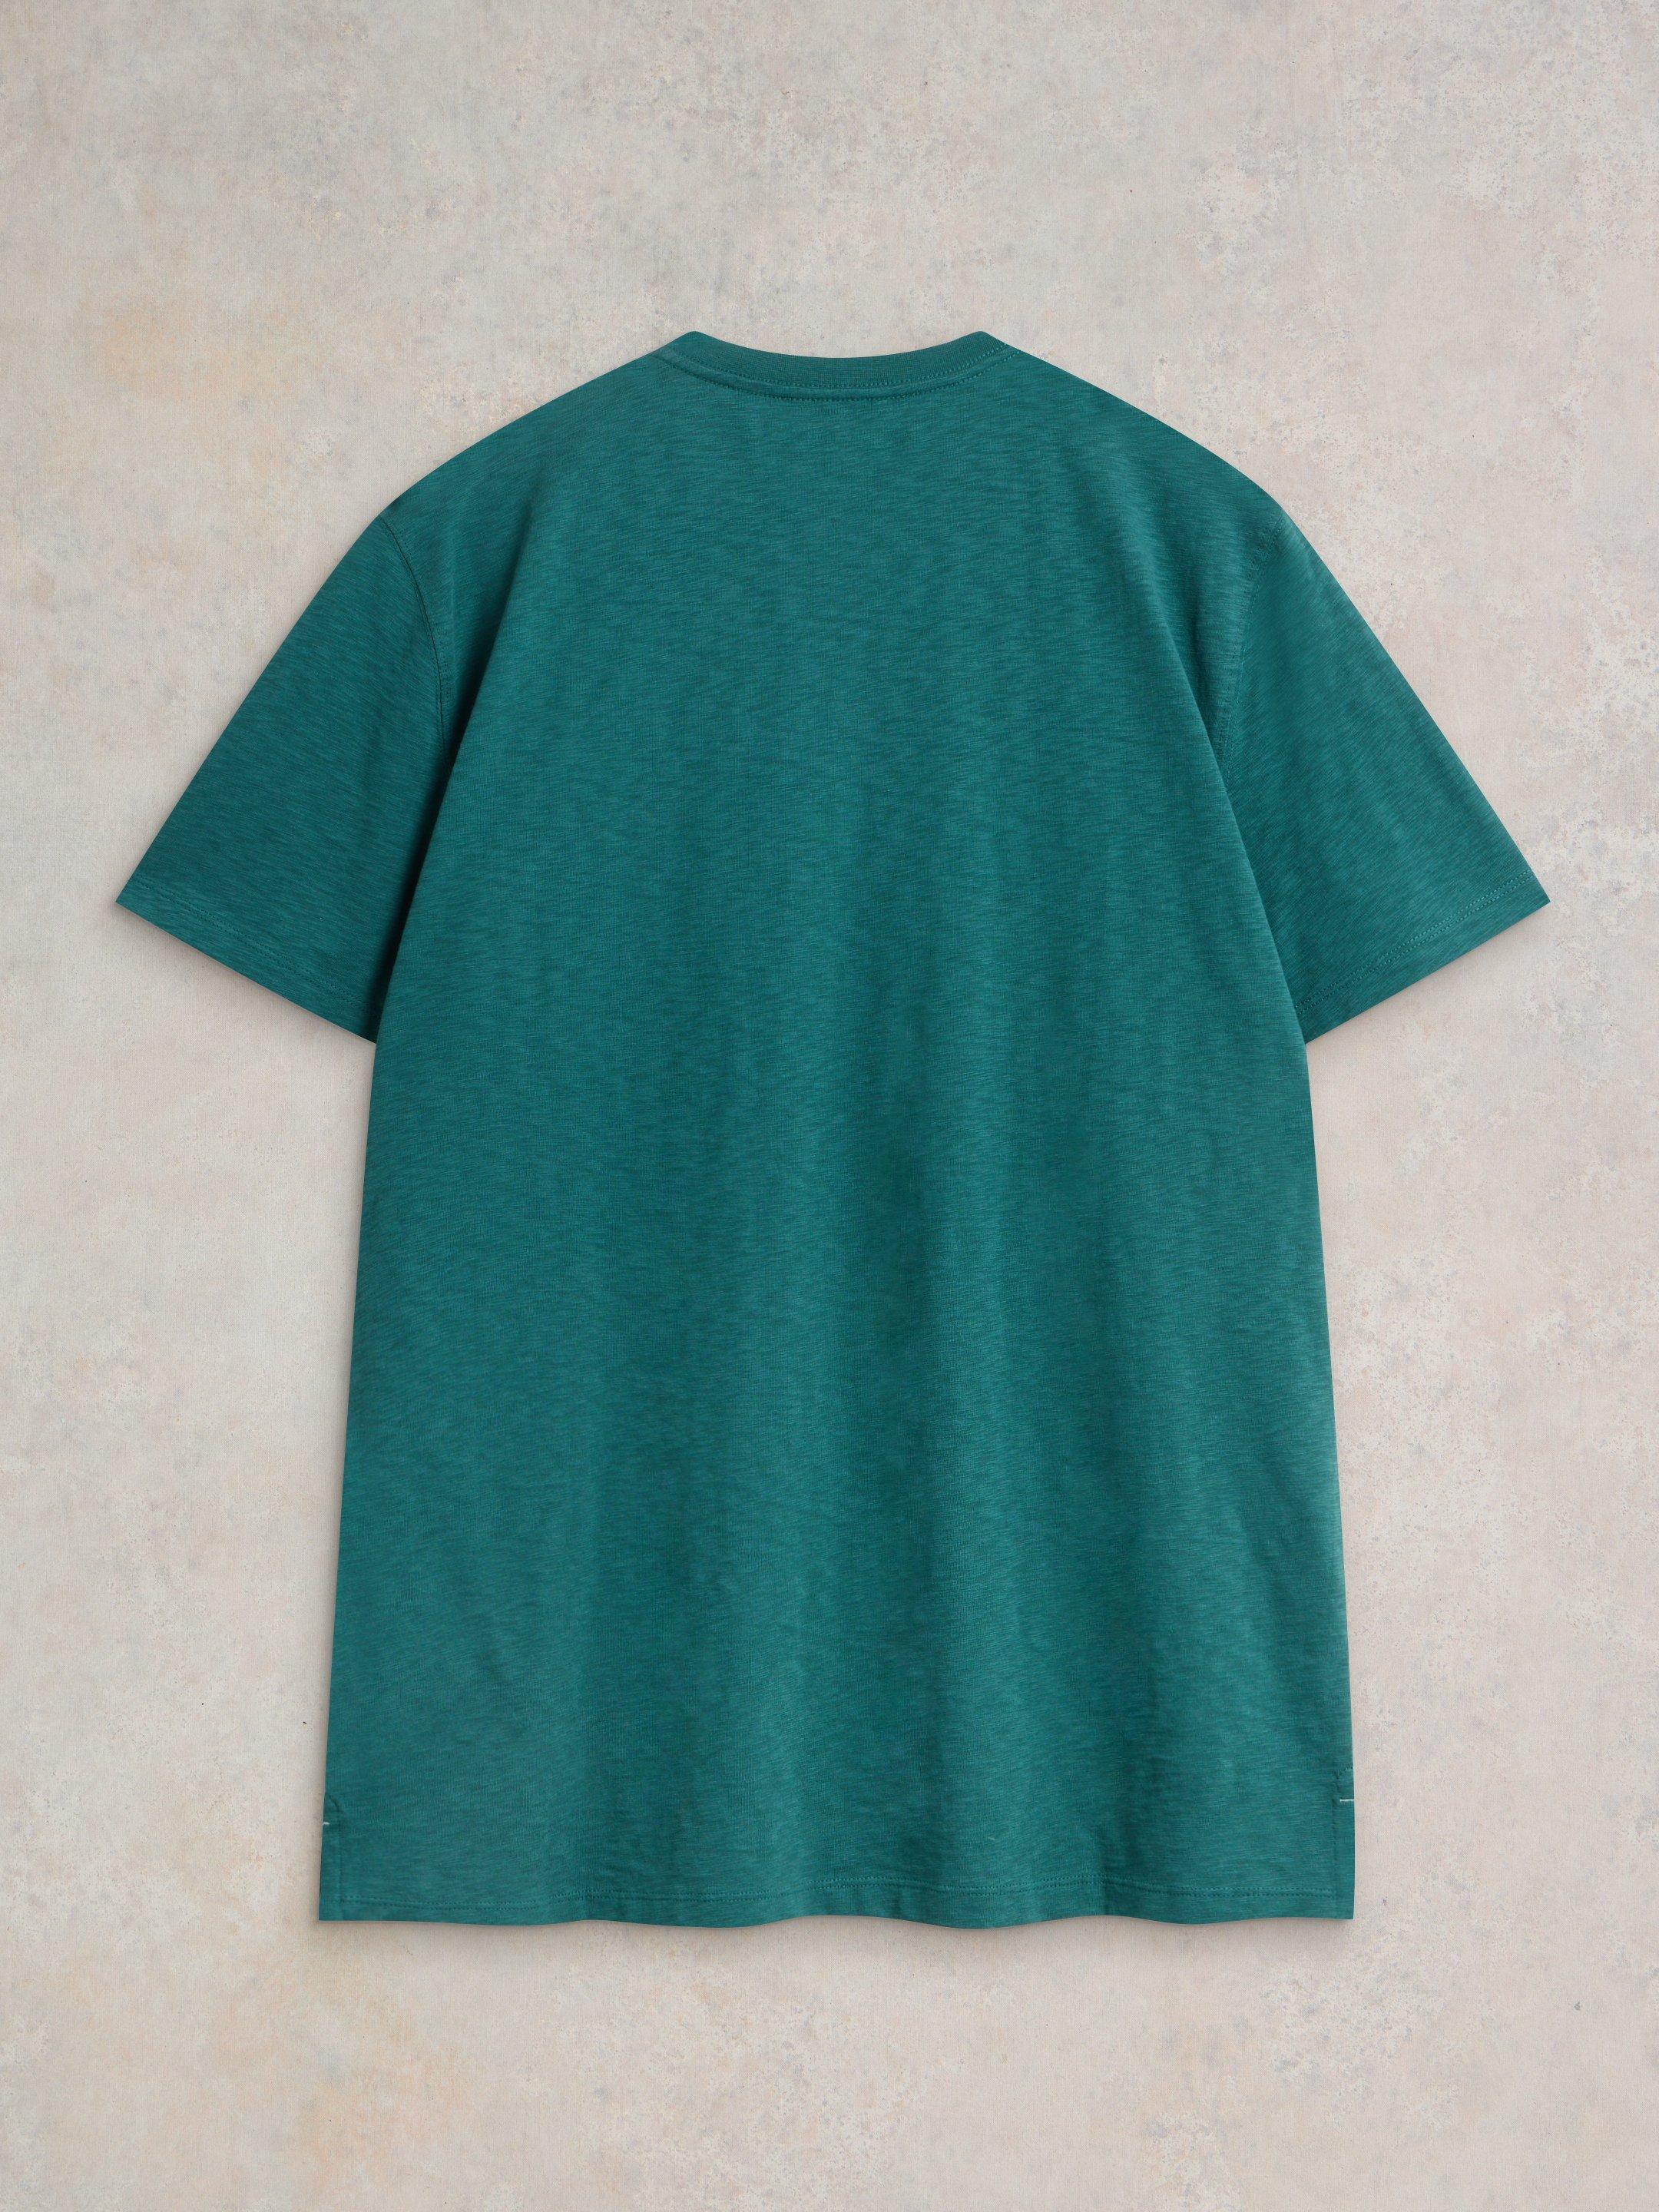 Mix Tape Graphic Tee in DK TEAL - FLAT BACK